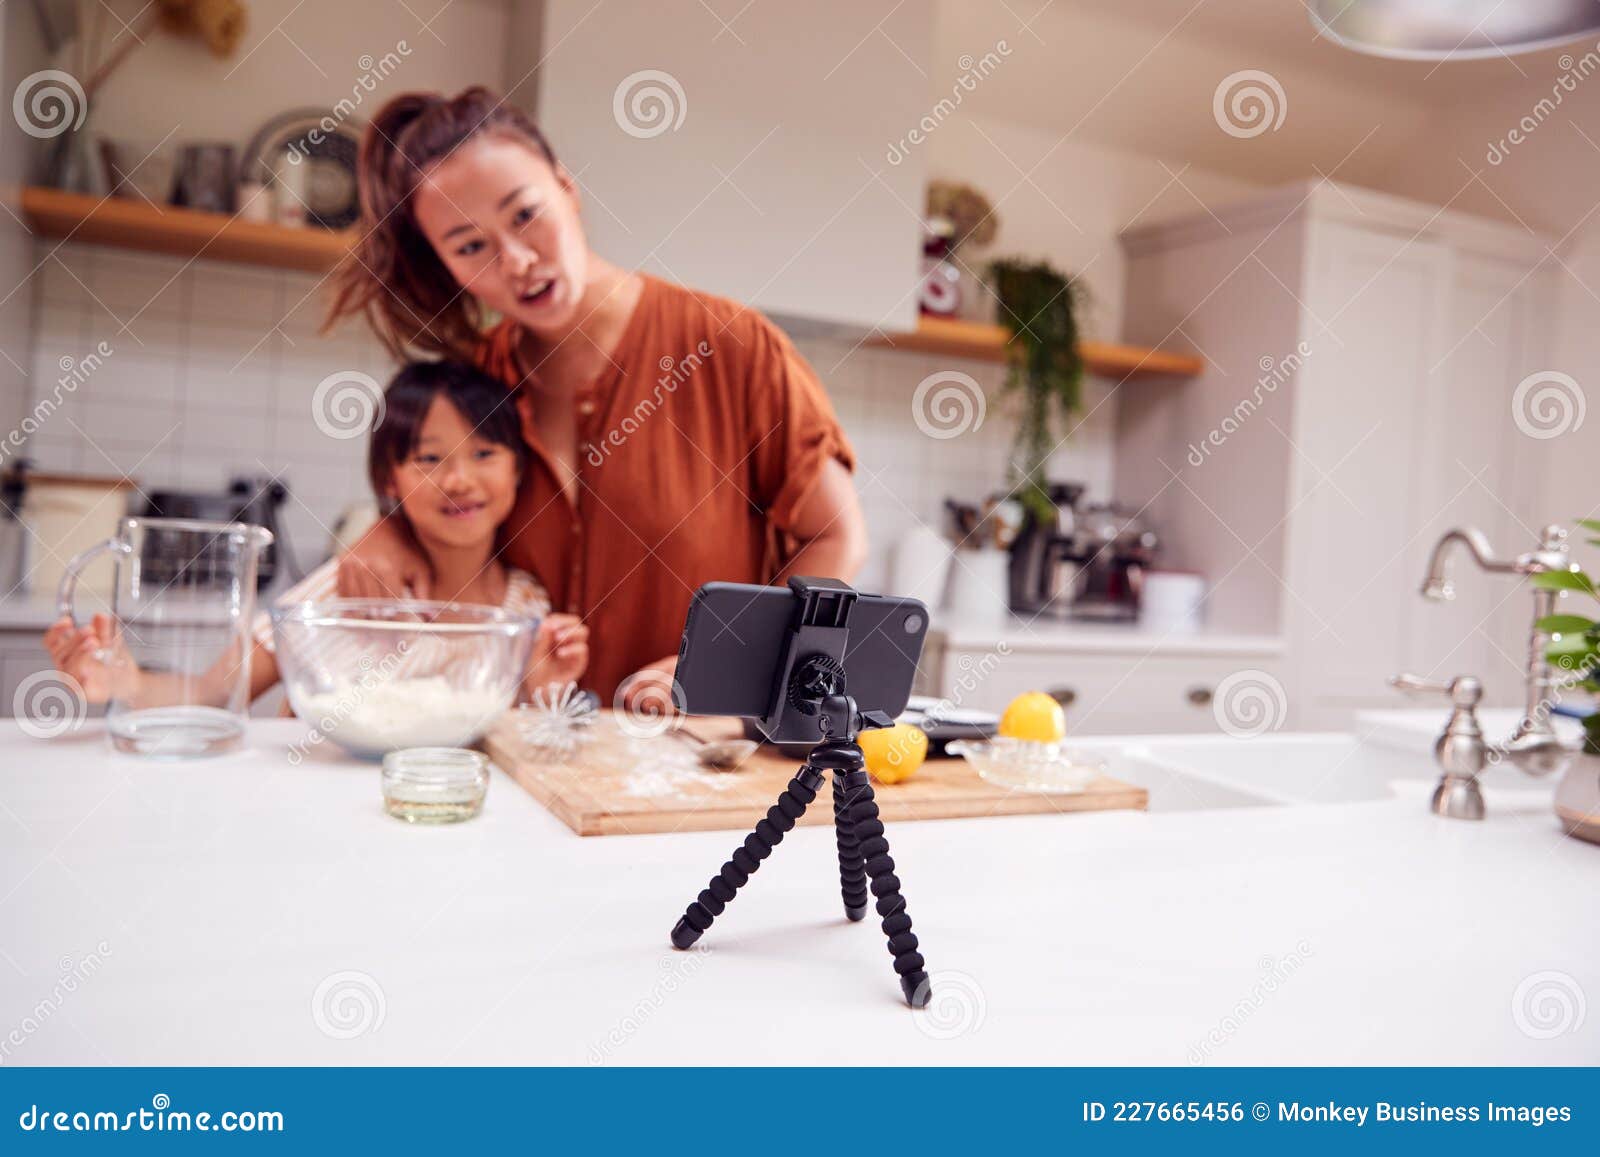 asian mother and daughter baking cupcakes in kitchen at home whilst on vlogging on mobile phone